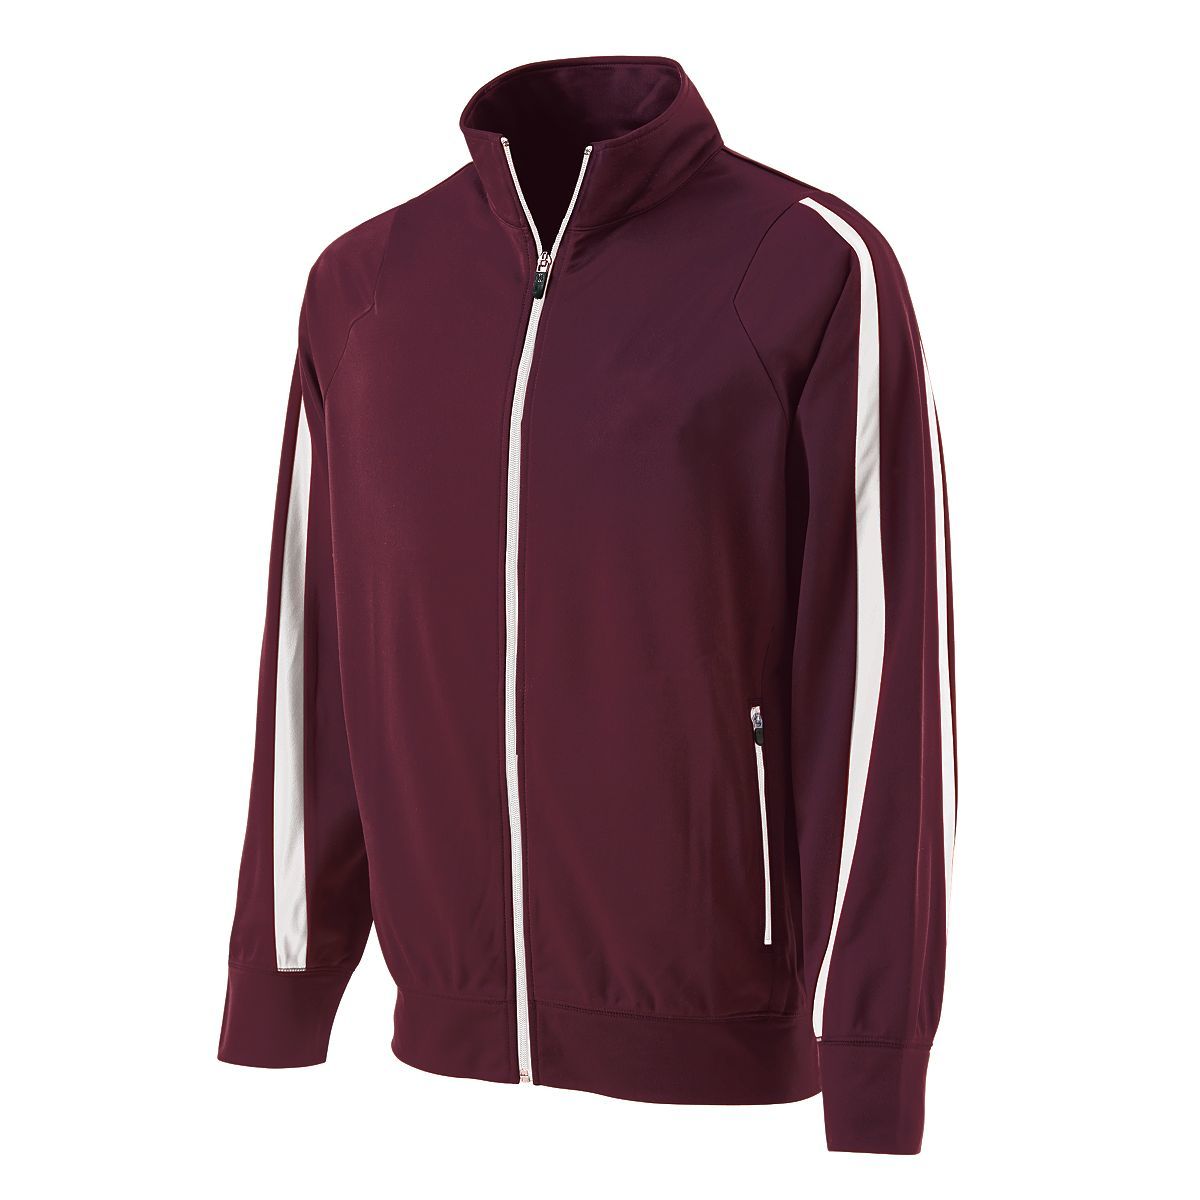 Holloway Determination Jacket in Maroon/White  -Part of the Adult, Adult-Jacket, Holloway, Outerwear product lines at KanaleyCreations.com